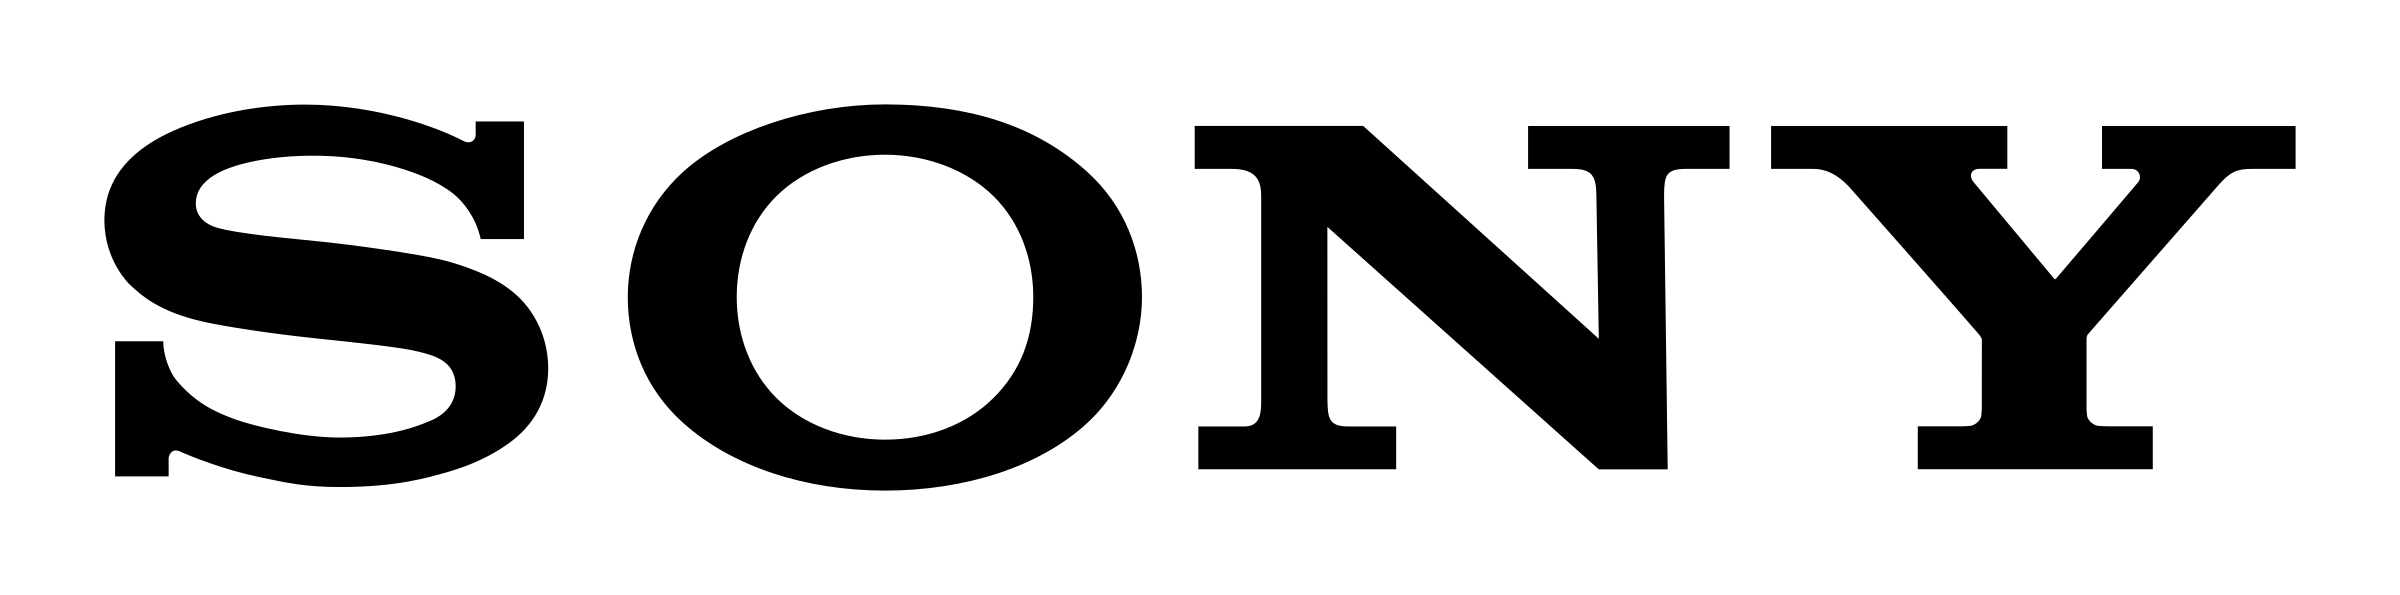 sony-logo-png-transparent.png